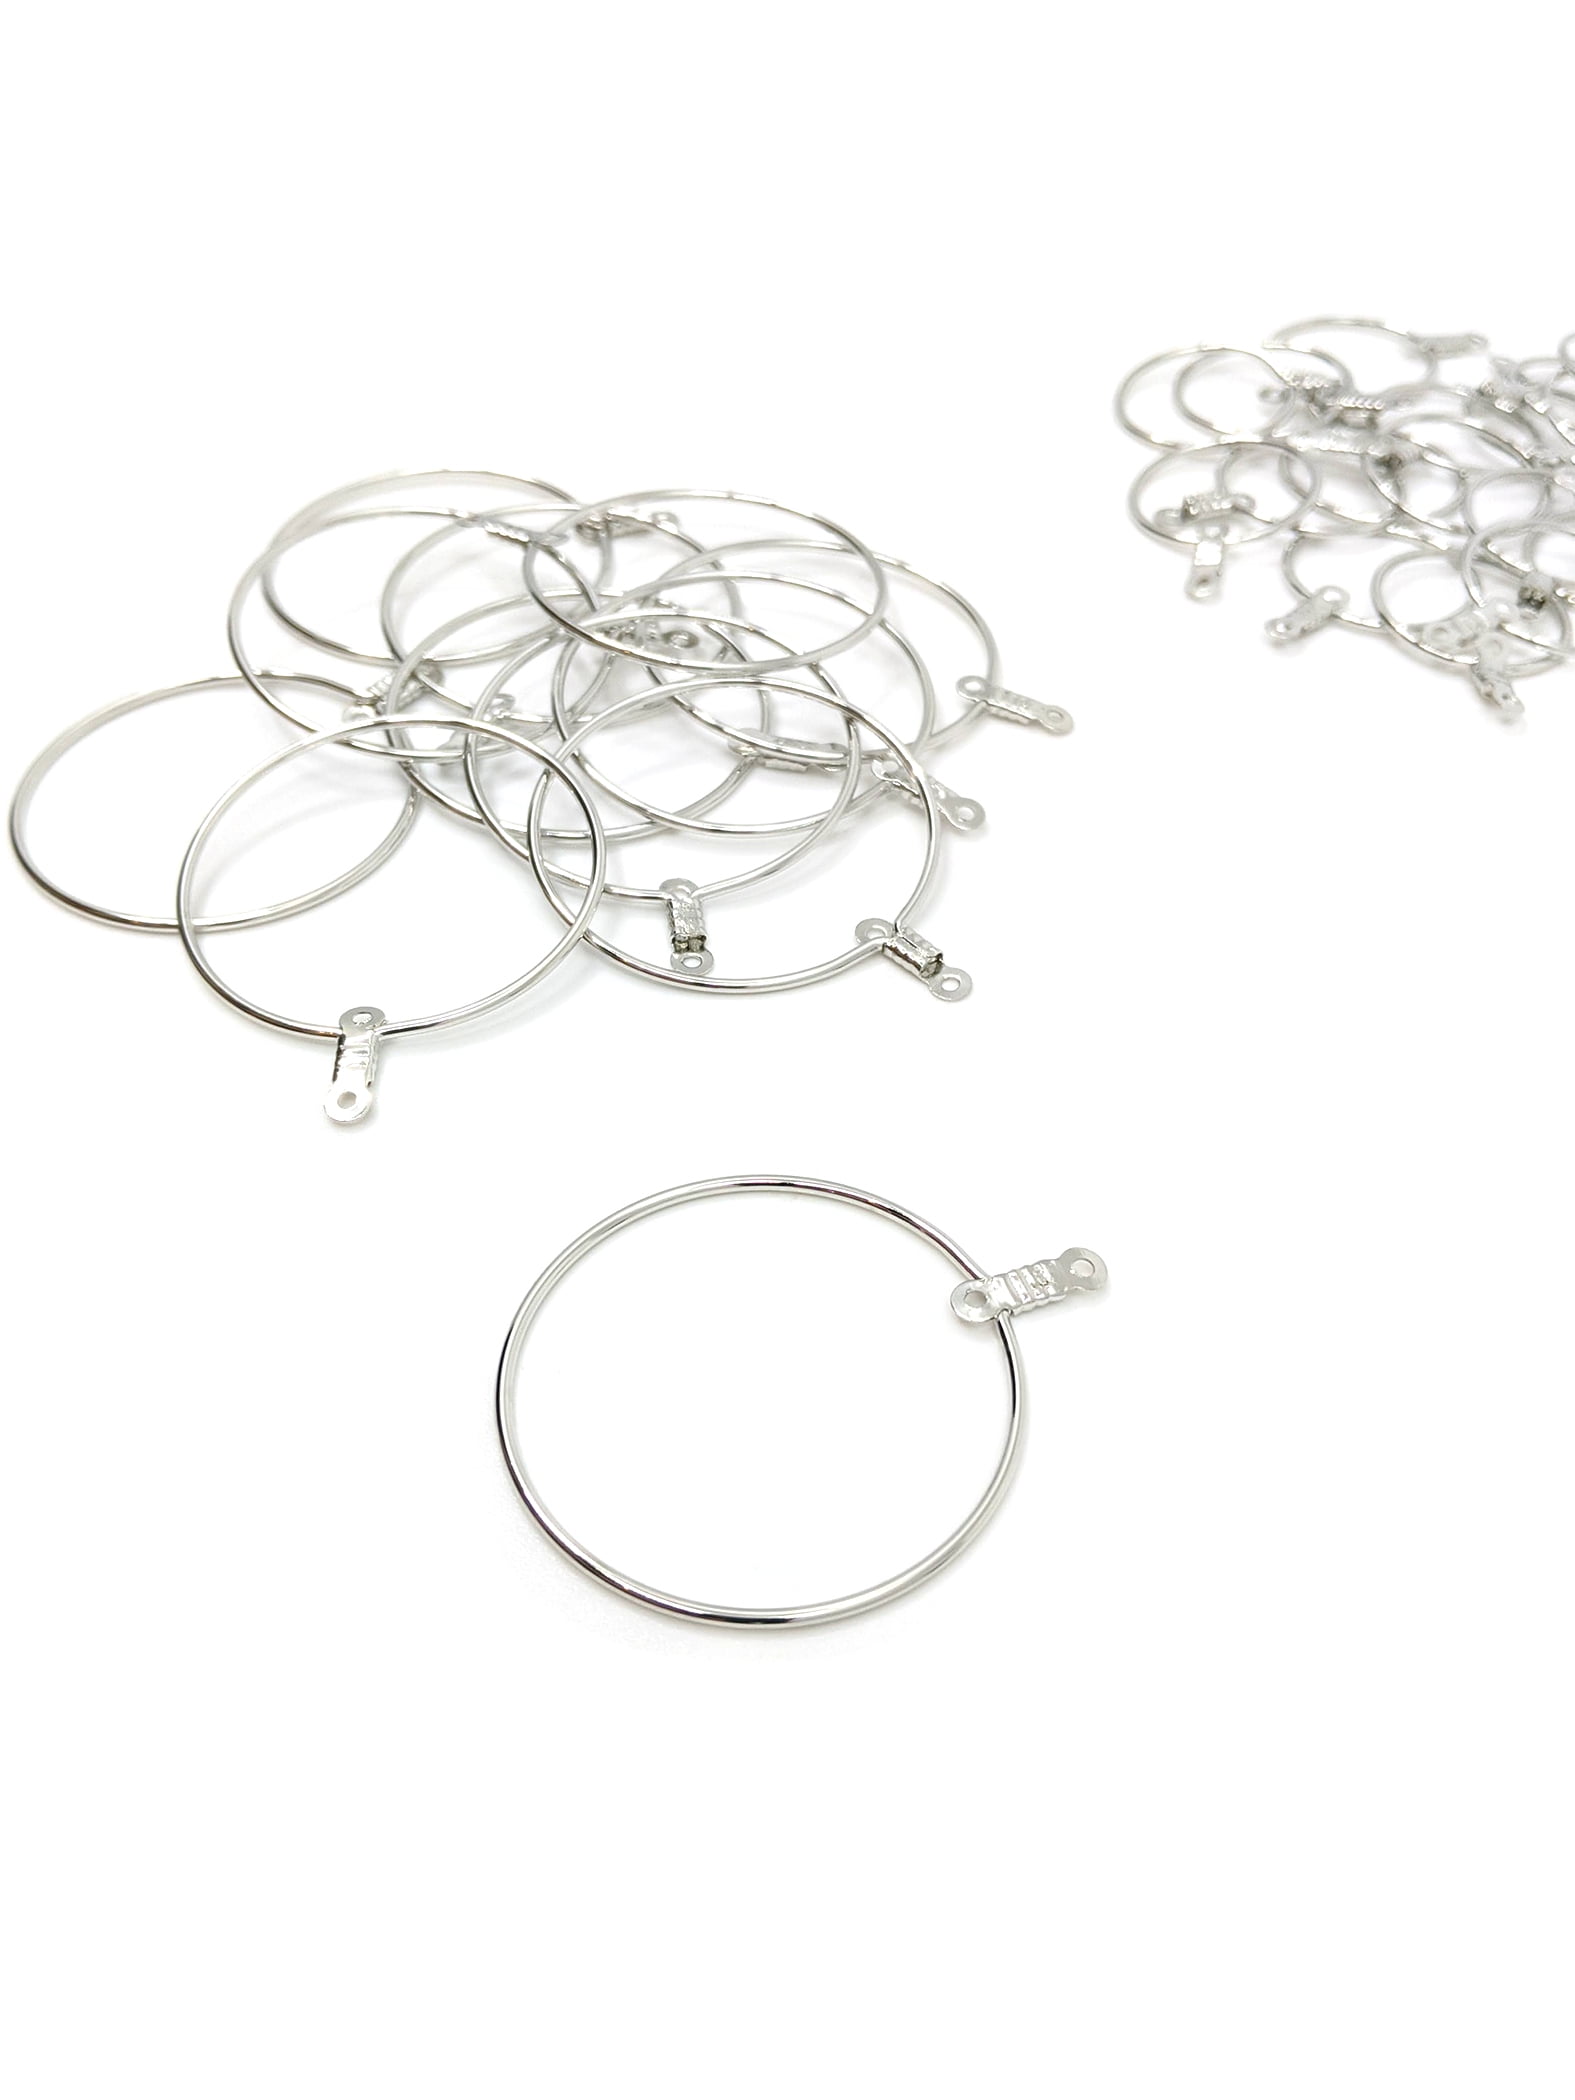 Hoop Earrings- Silver Toned Super Thin for Adding Beads for Jewelry Making  Craft 